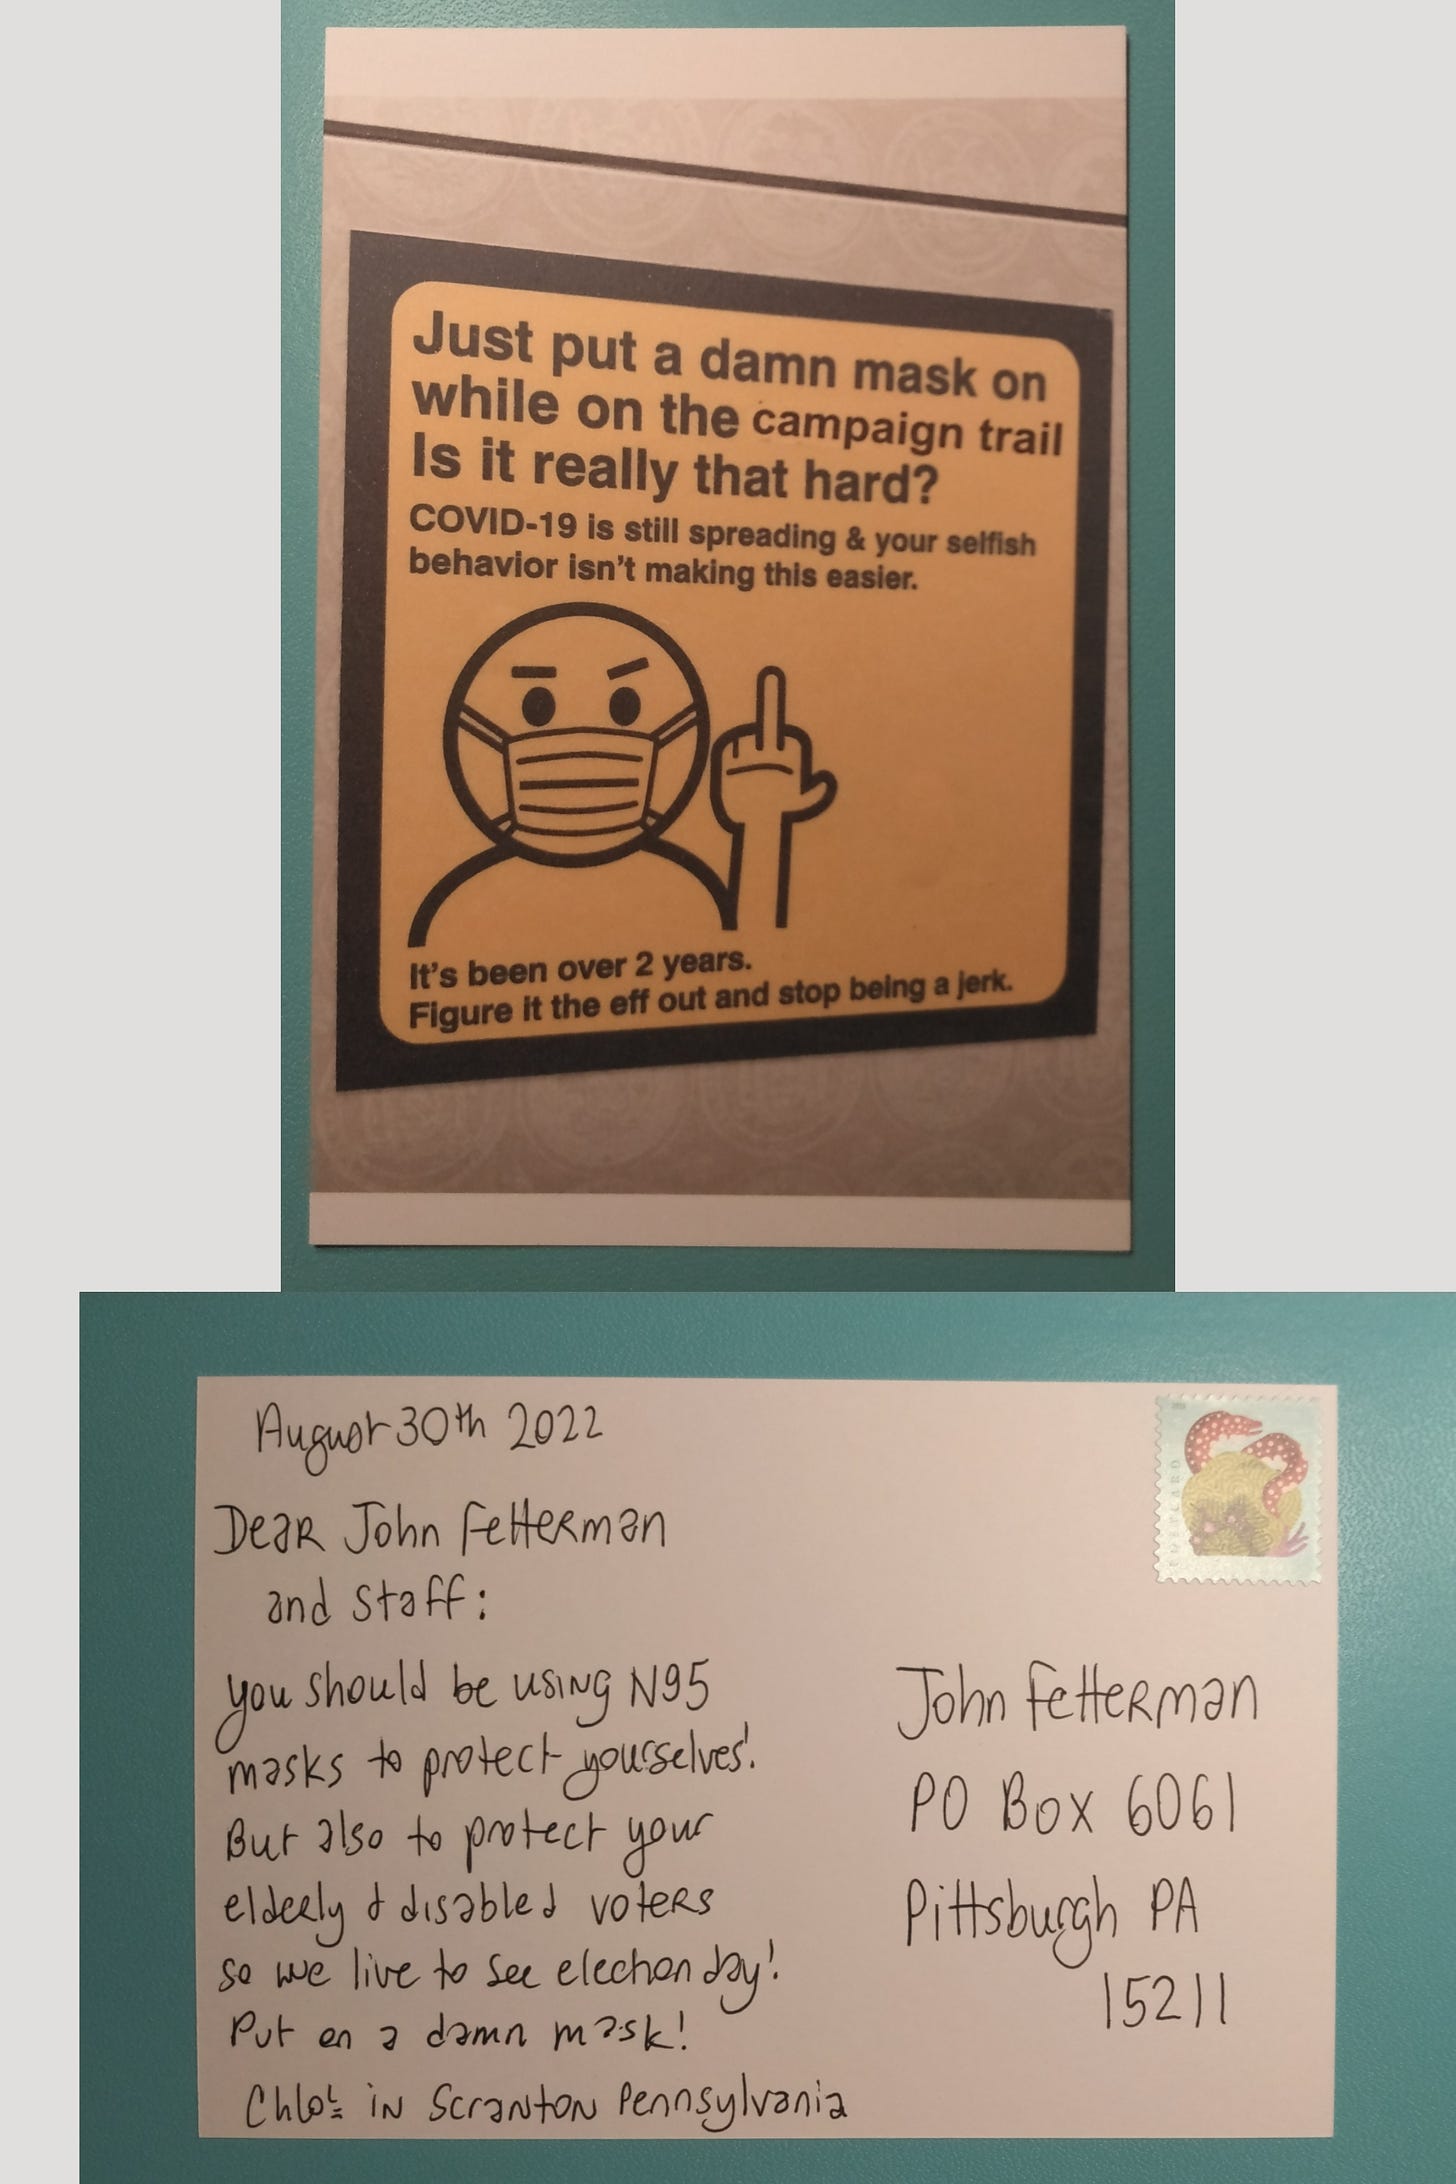 Post card to candidate John Fetterman saying put on a damn mask when you’re on the campaign trail using the sign in the style of the New York City transit mask signs.